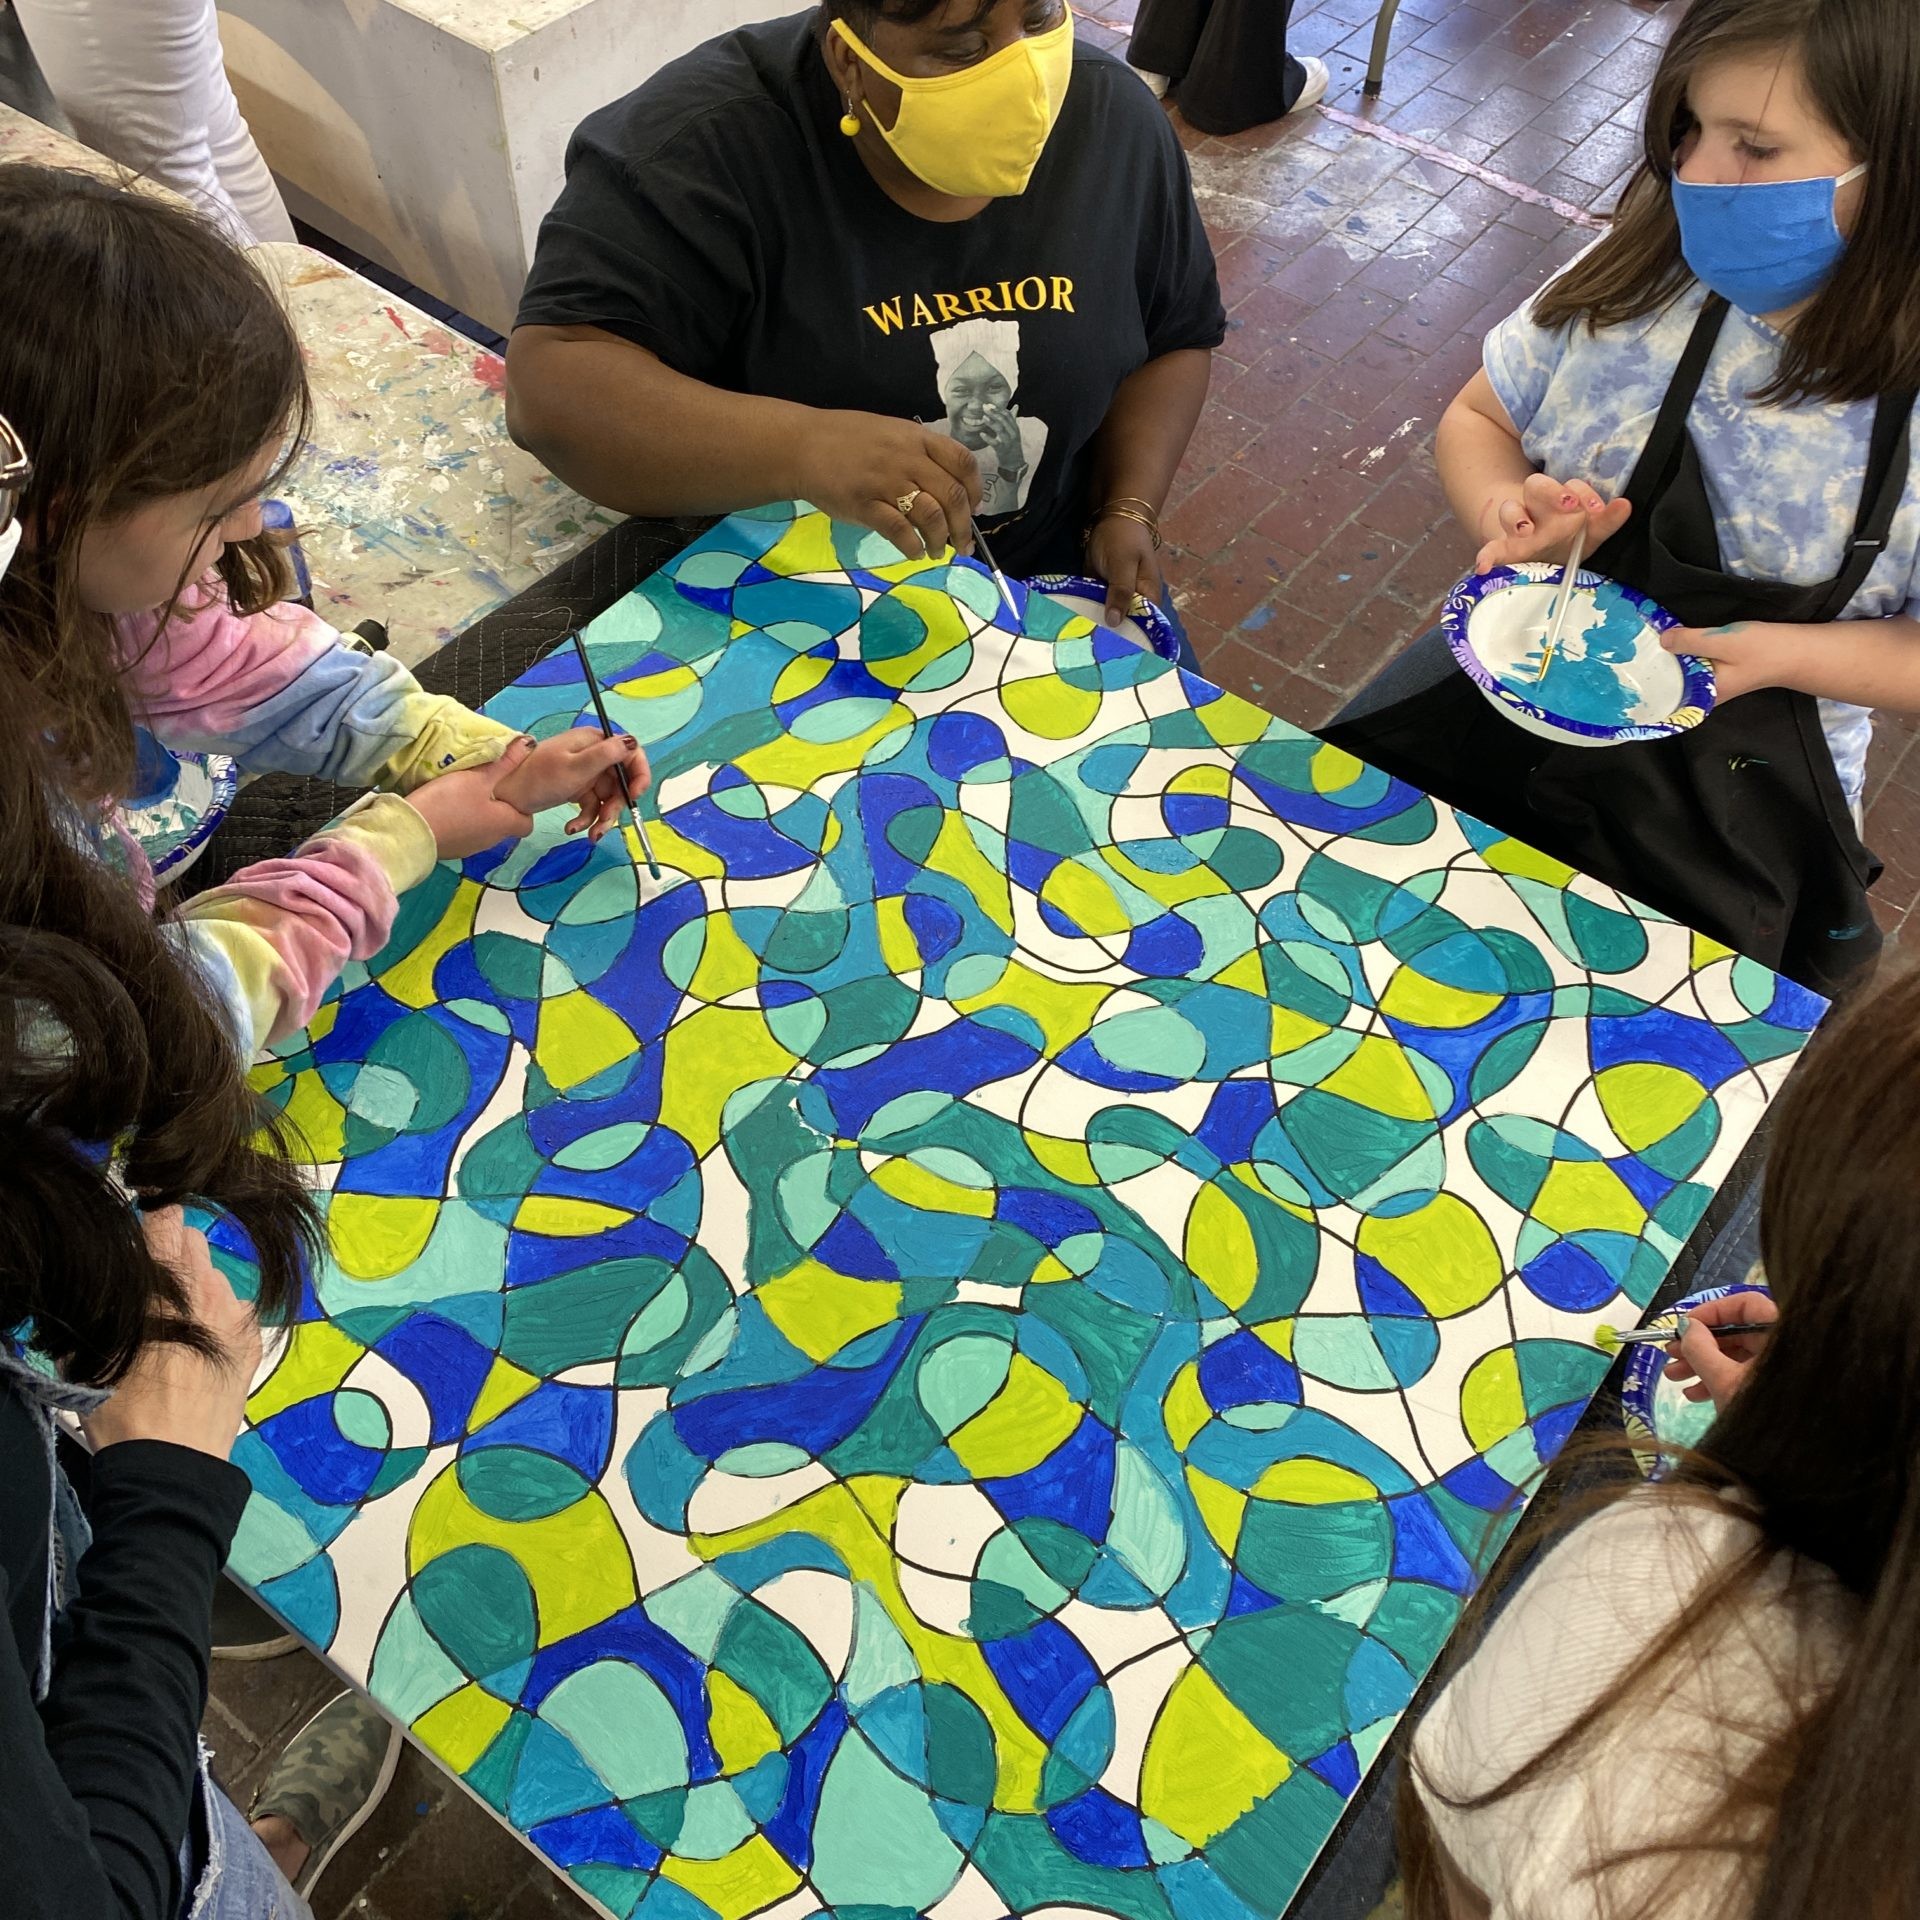 Four chlidren help a woman paint a large canvas with blue and green paints